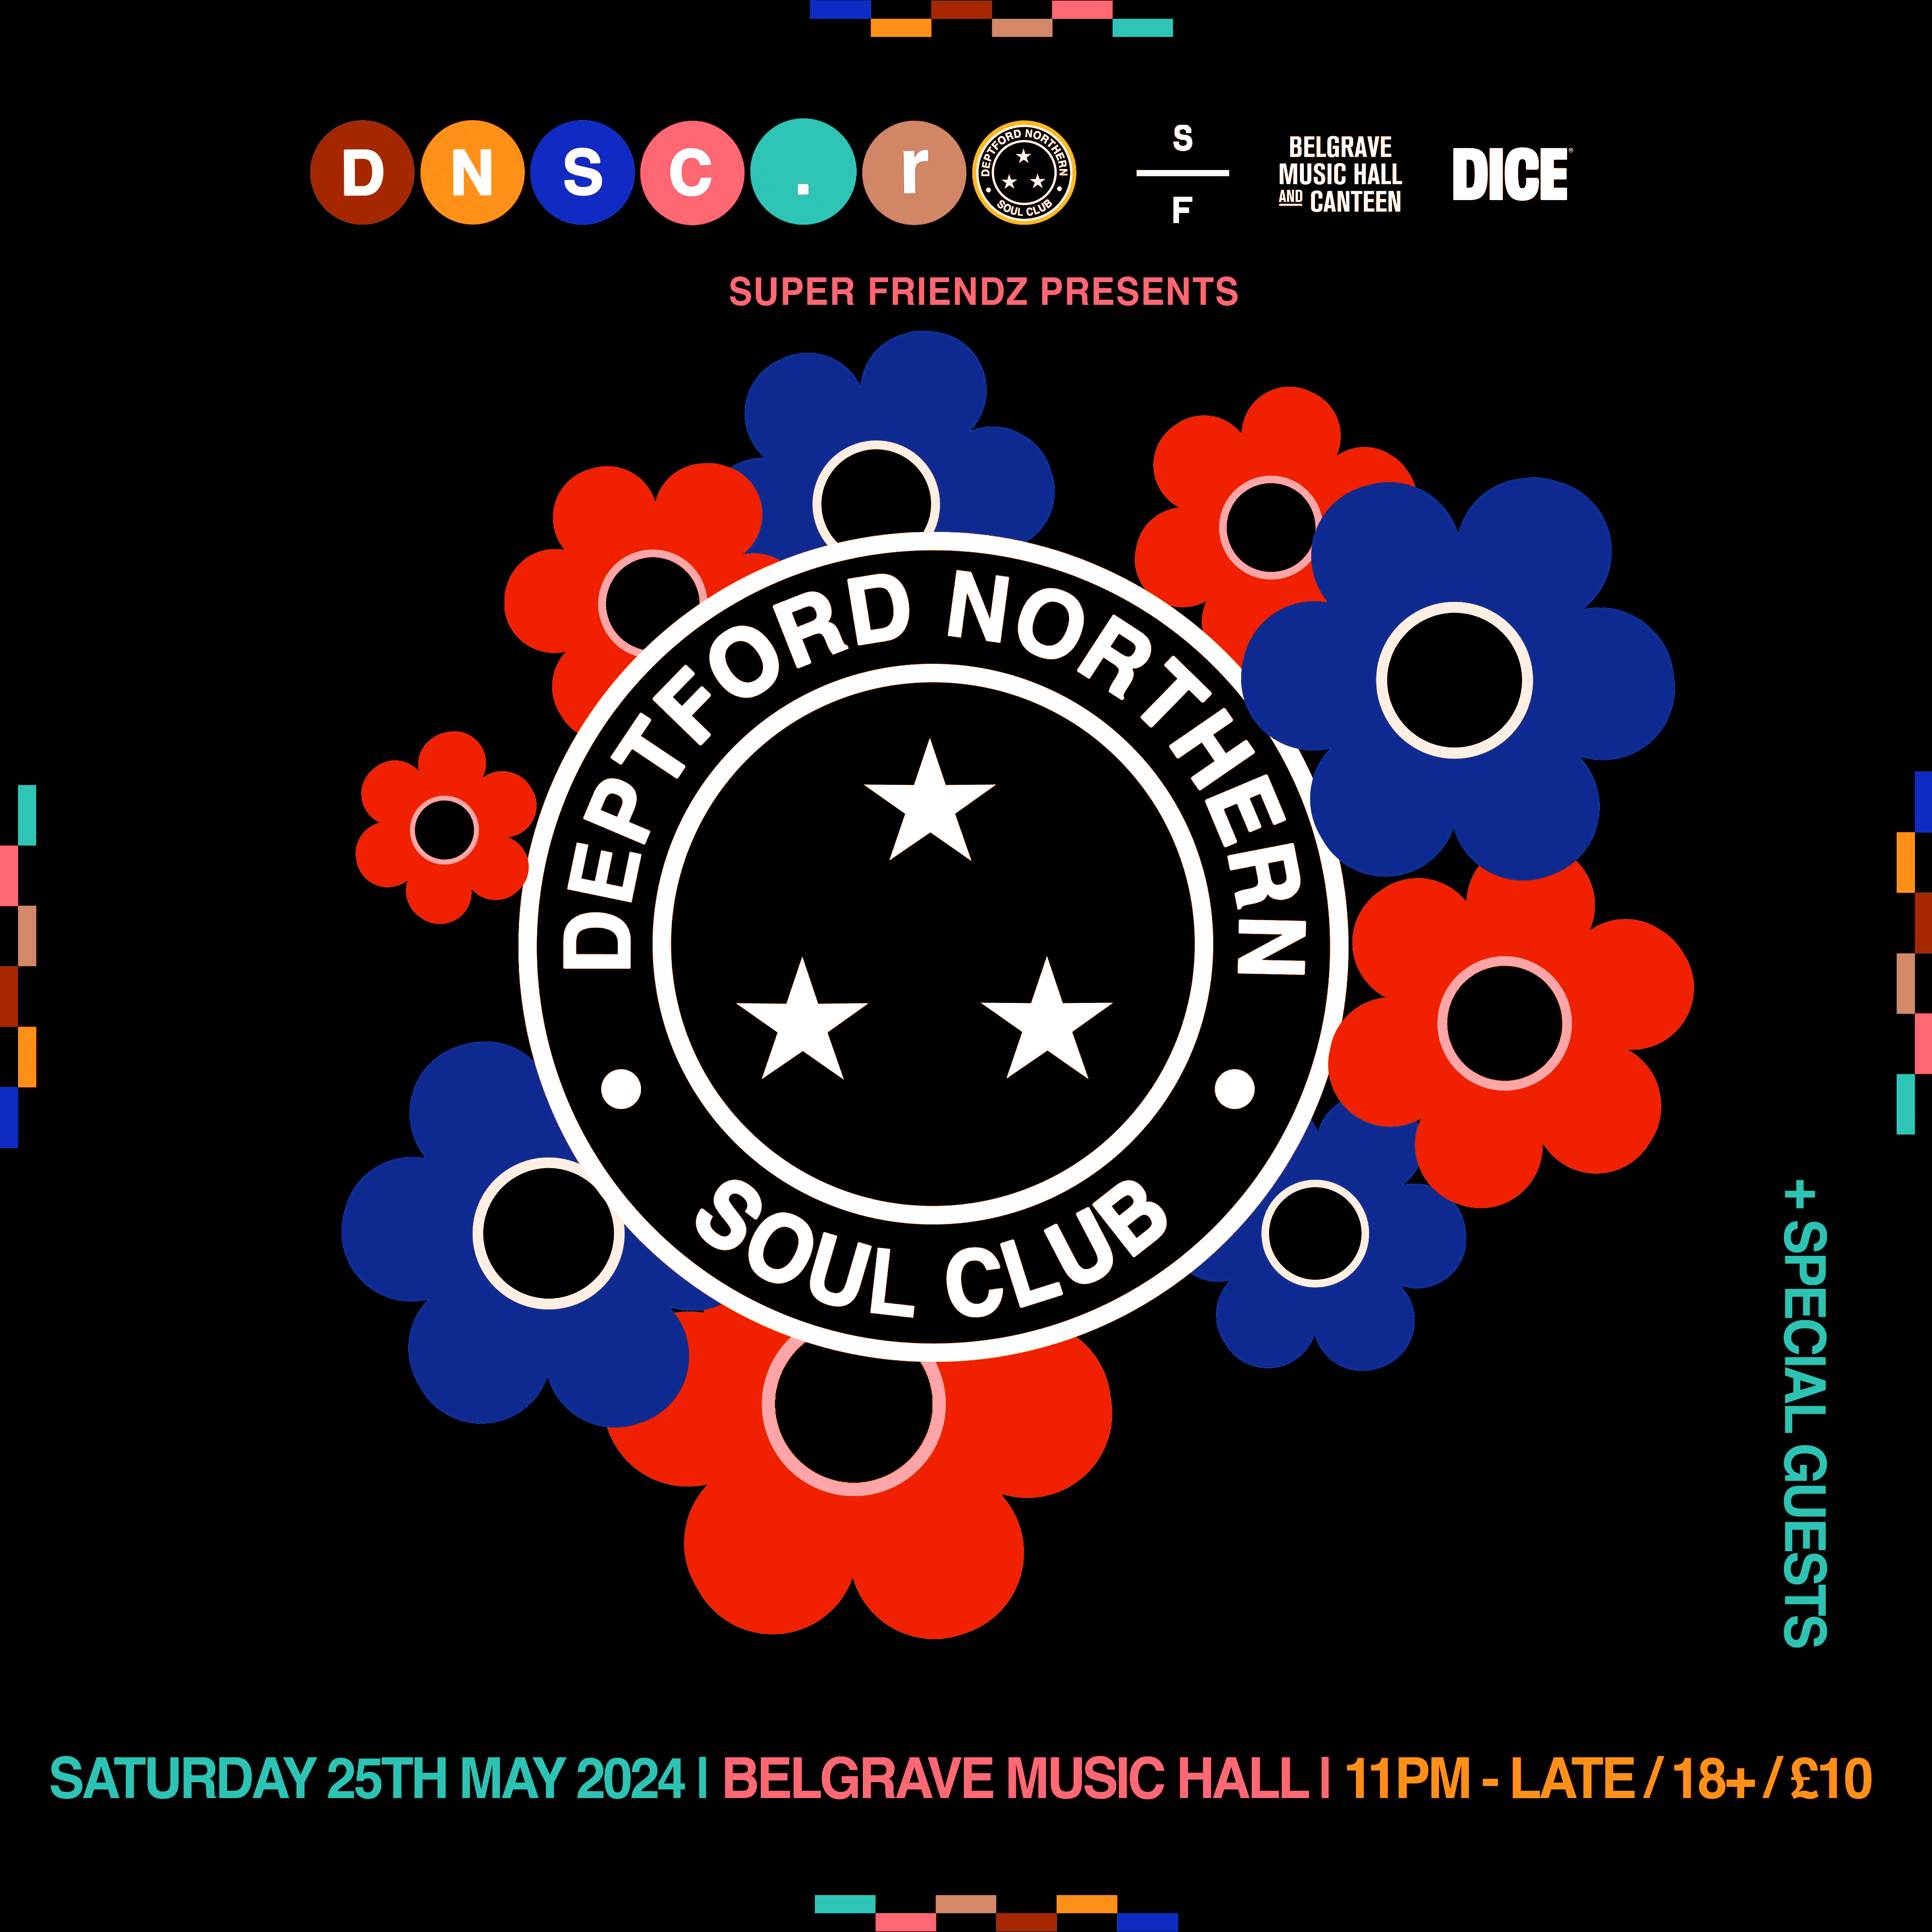 Deptford Northern Soul Club - Saturday 25th May 2024 - Belgrave Music Hall & Canteen - フライヤー表